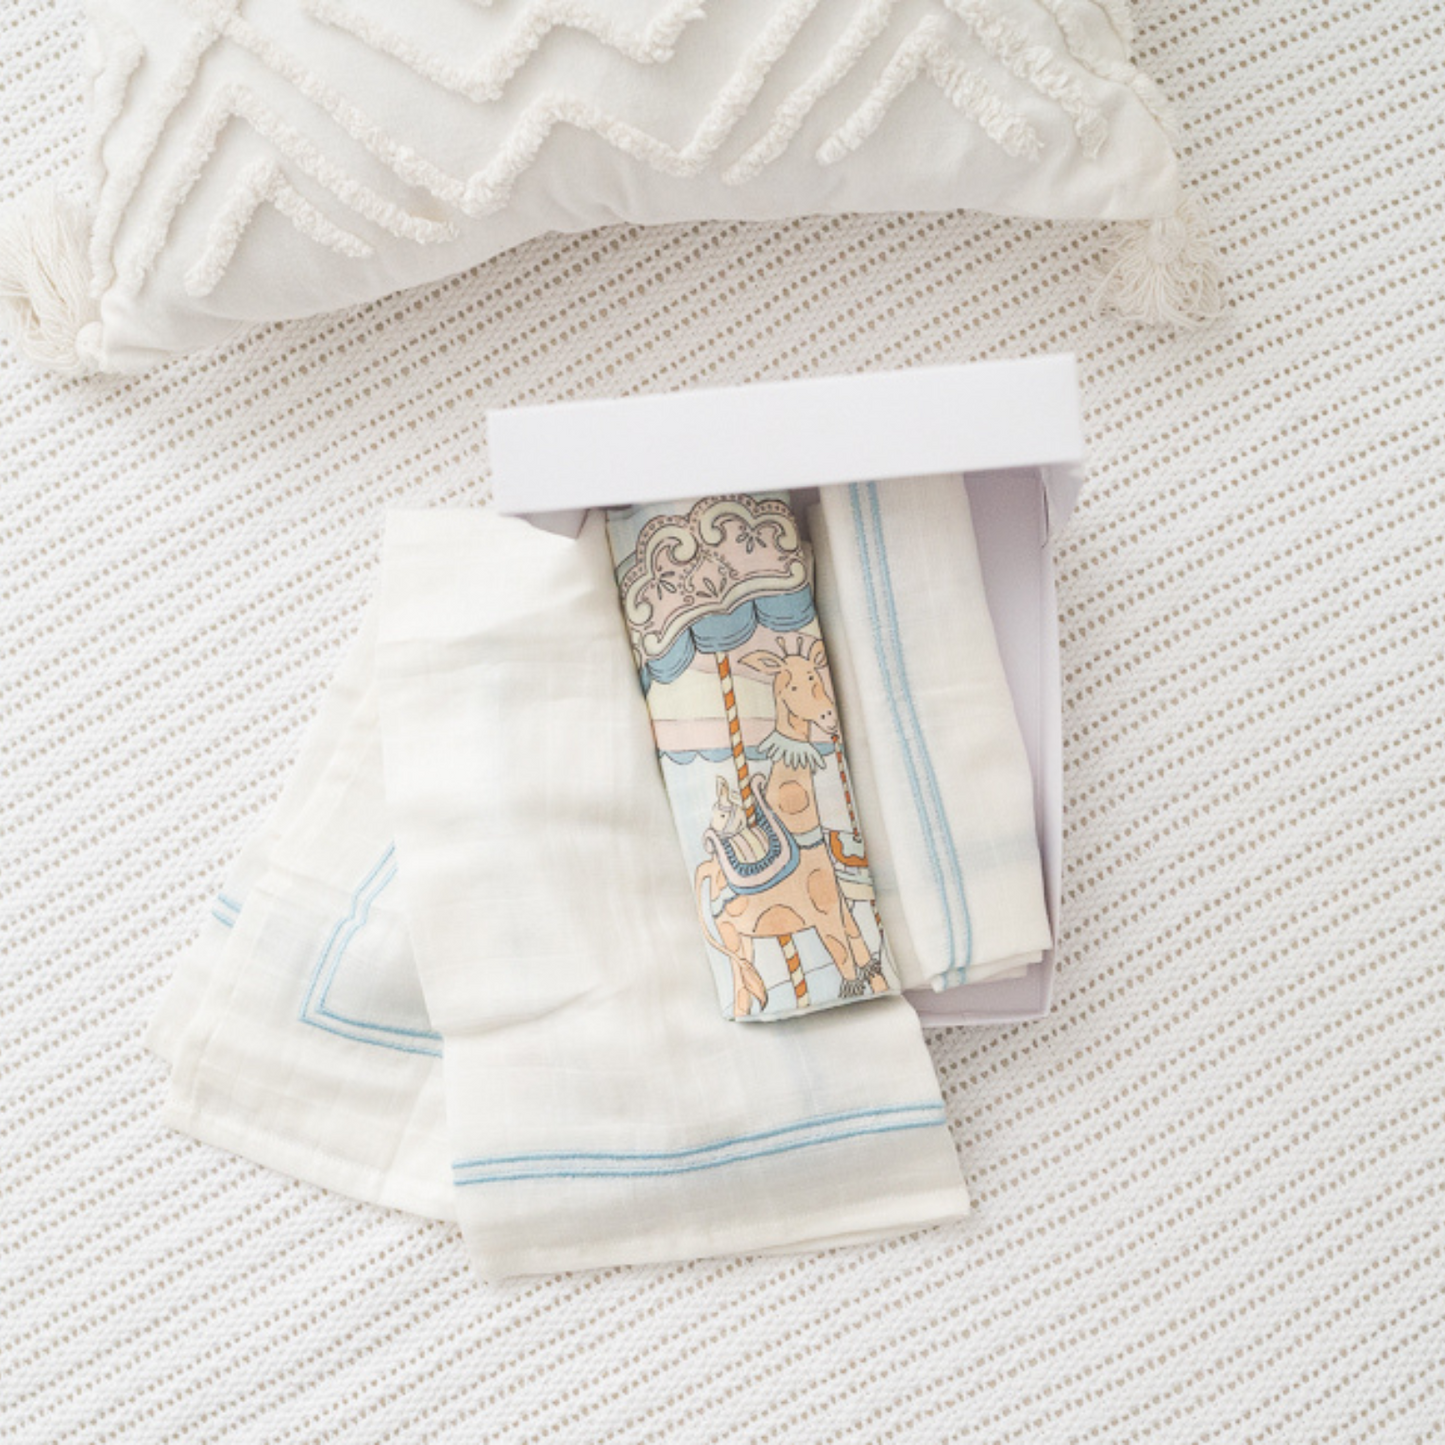 Load image into Gallery viewer, Carousel Blue Stripe Muslin Swaddle (Set of 3)
